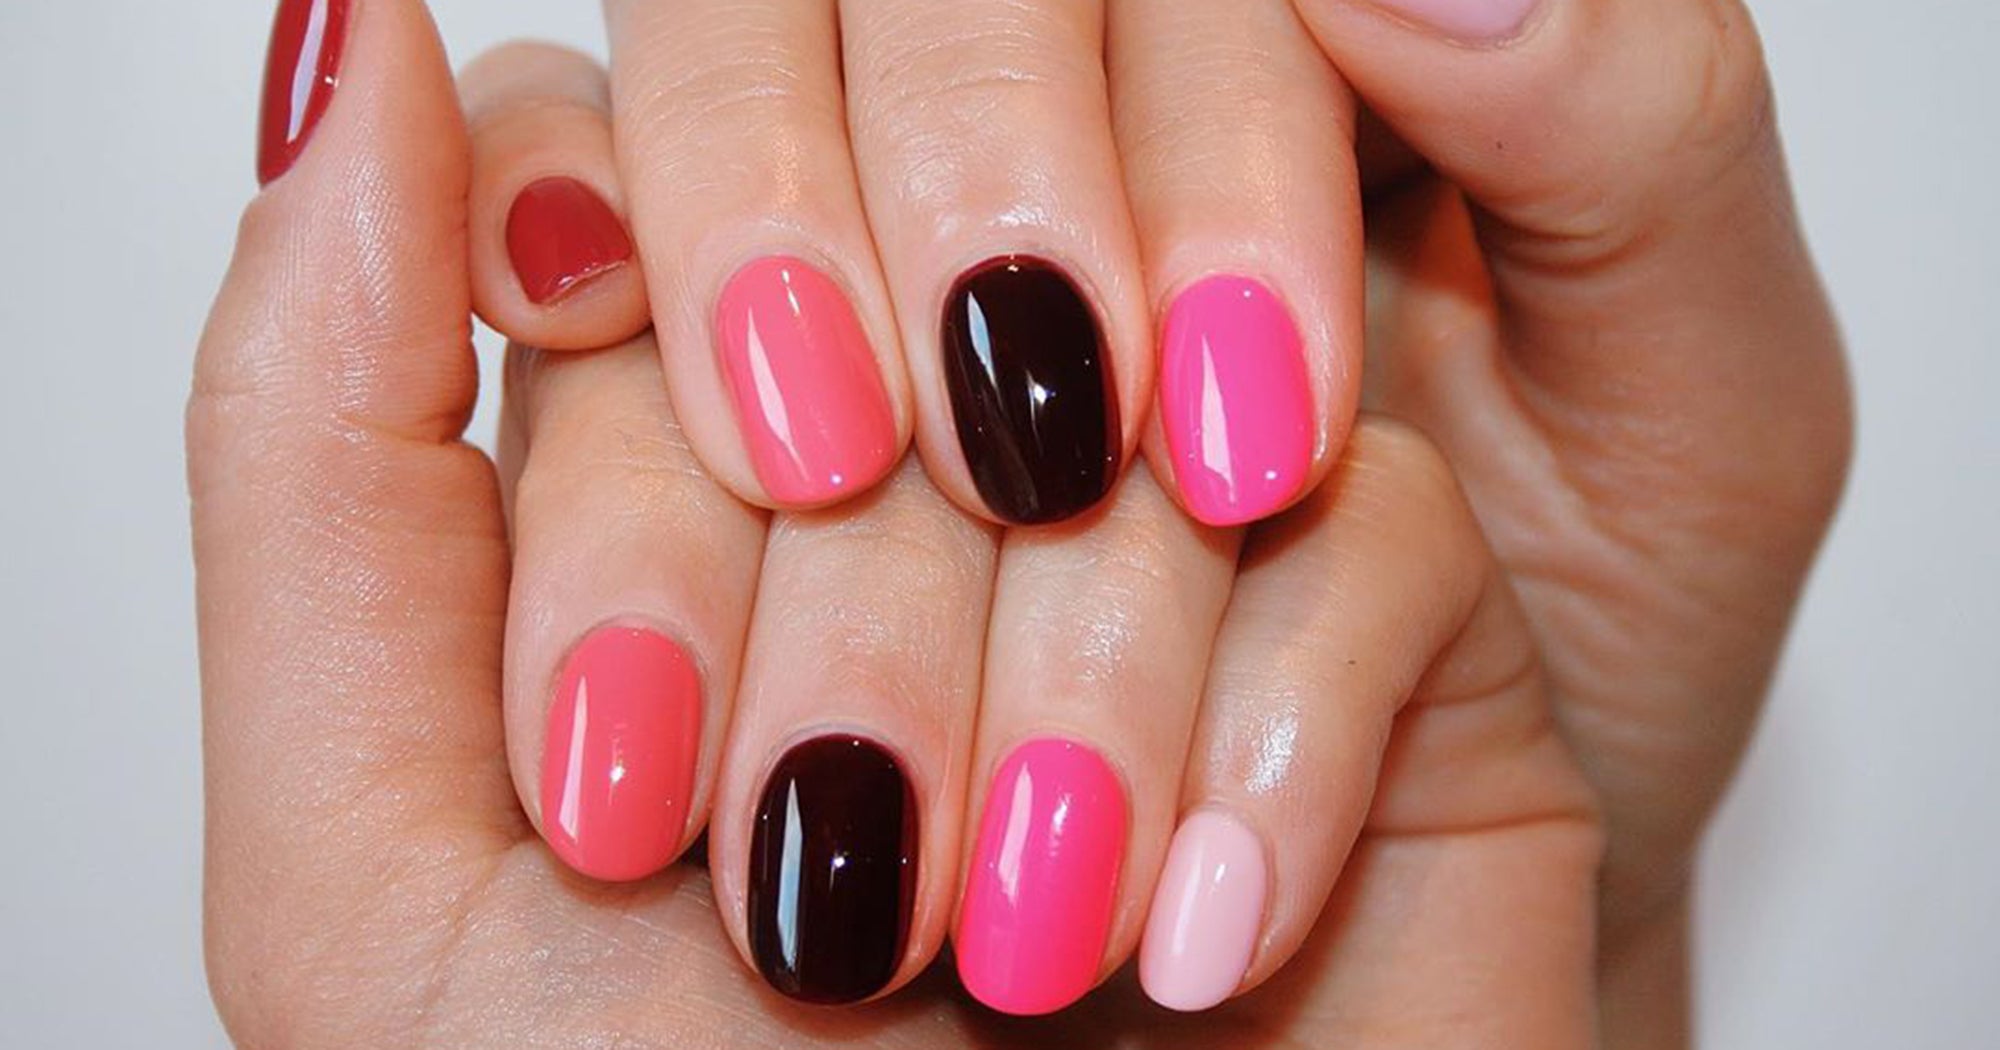 Simple Nail Art Ideas for Beginners - wide 8